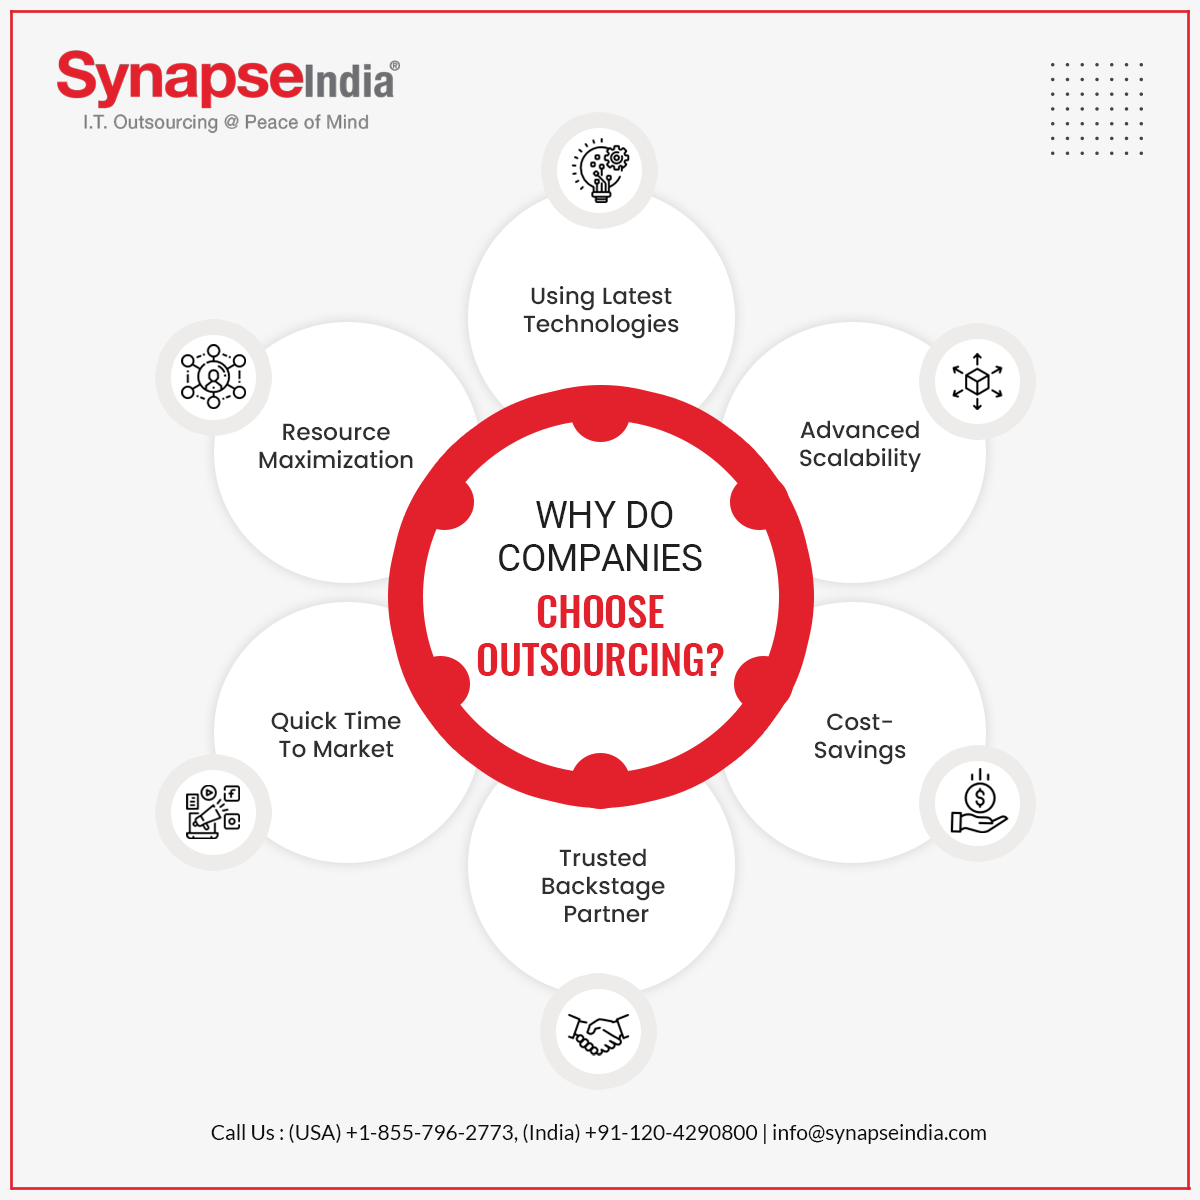 Companies choose outsourcing to save their Cost- Infographic